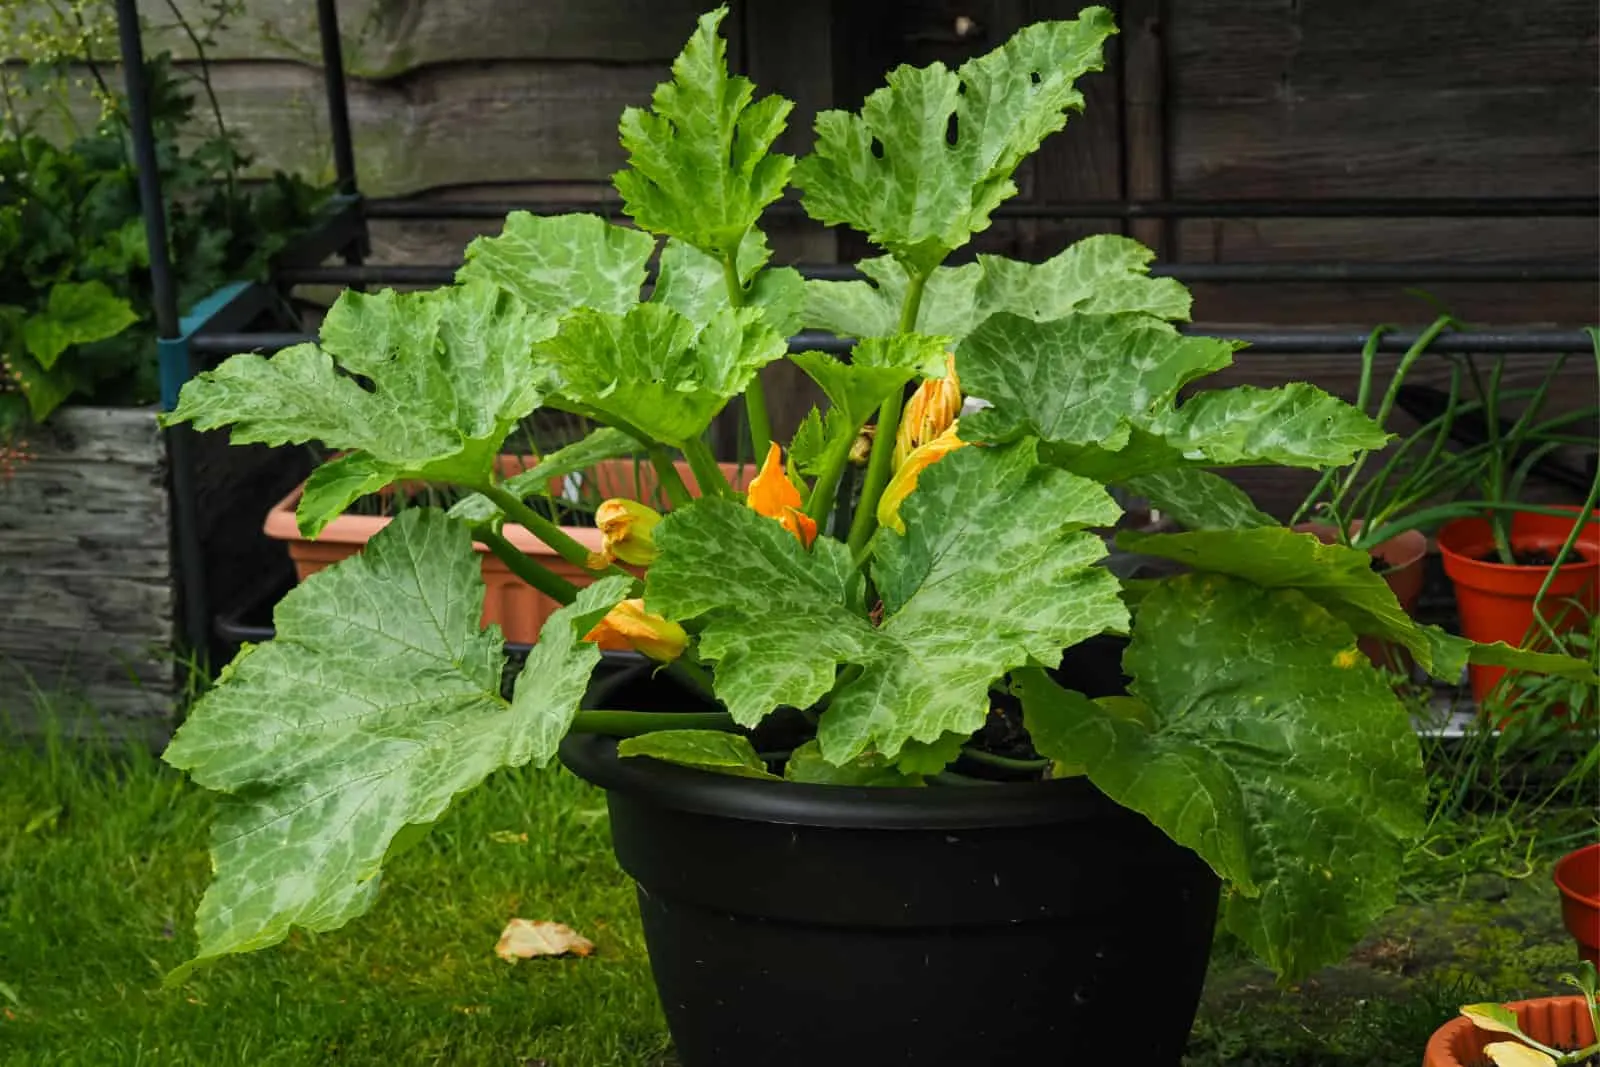 Courgette plant, variety Midnight, growing in a black plastic containder